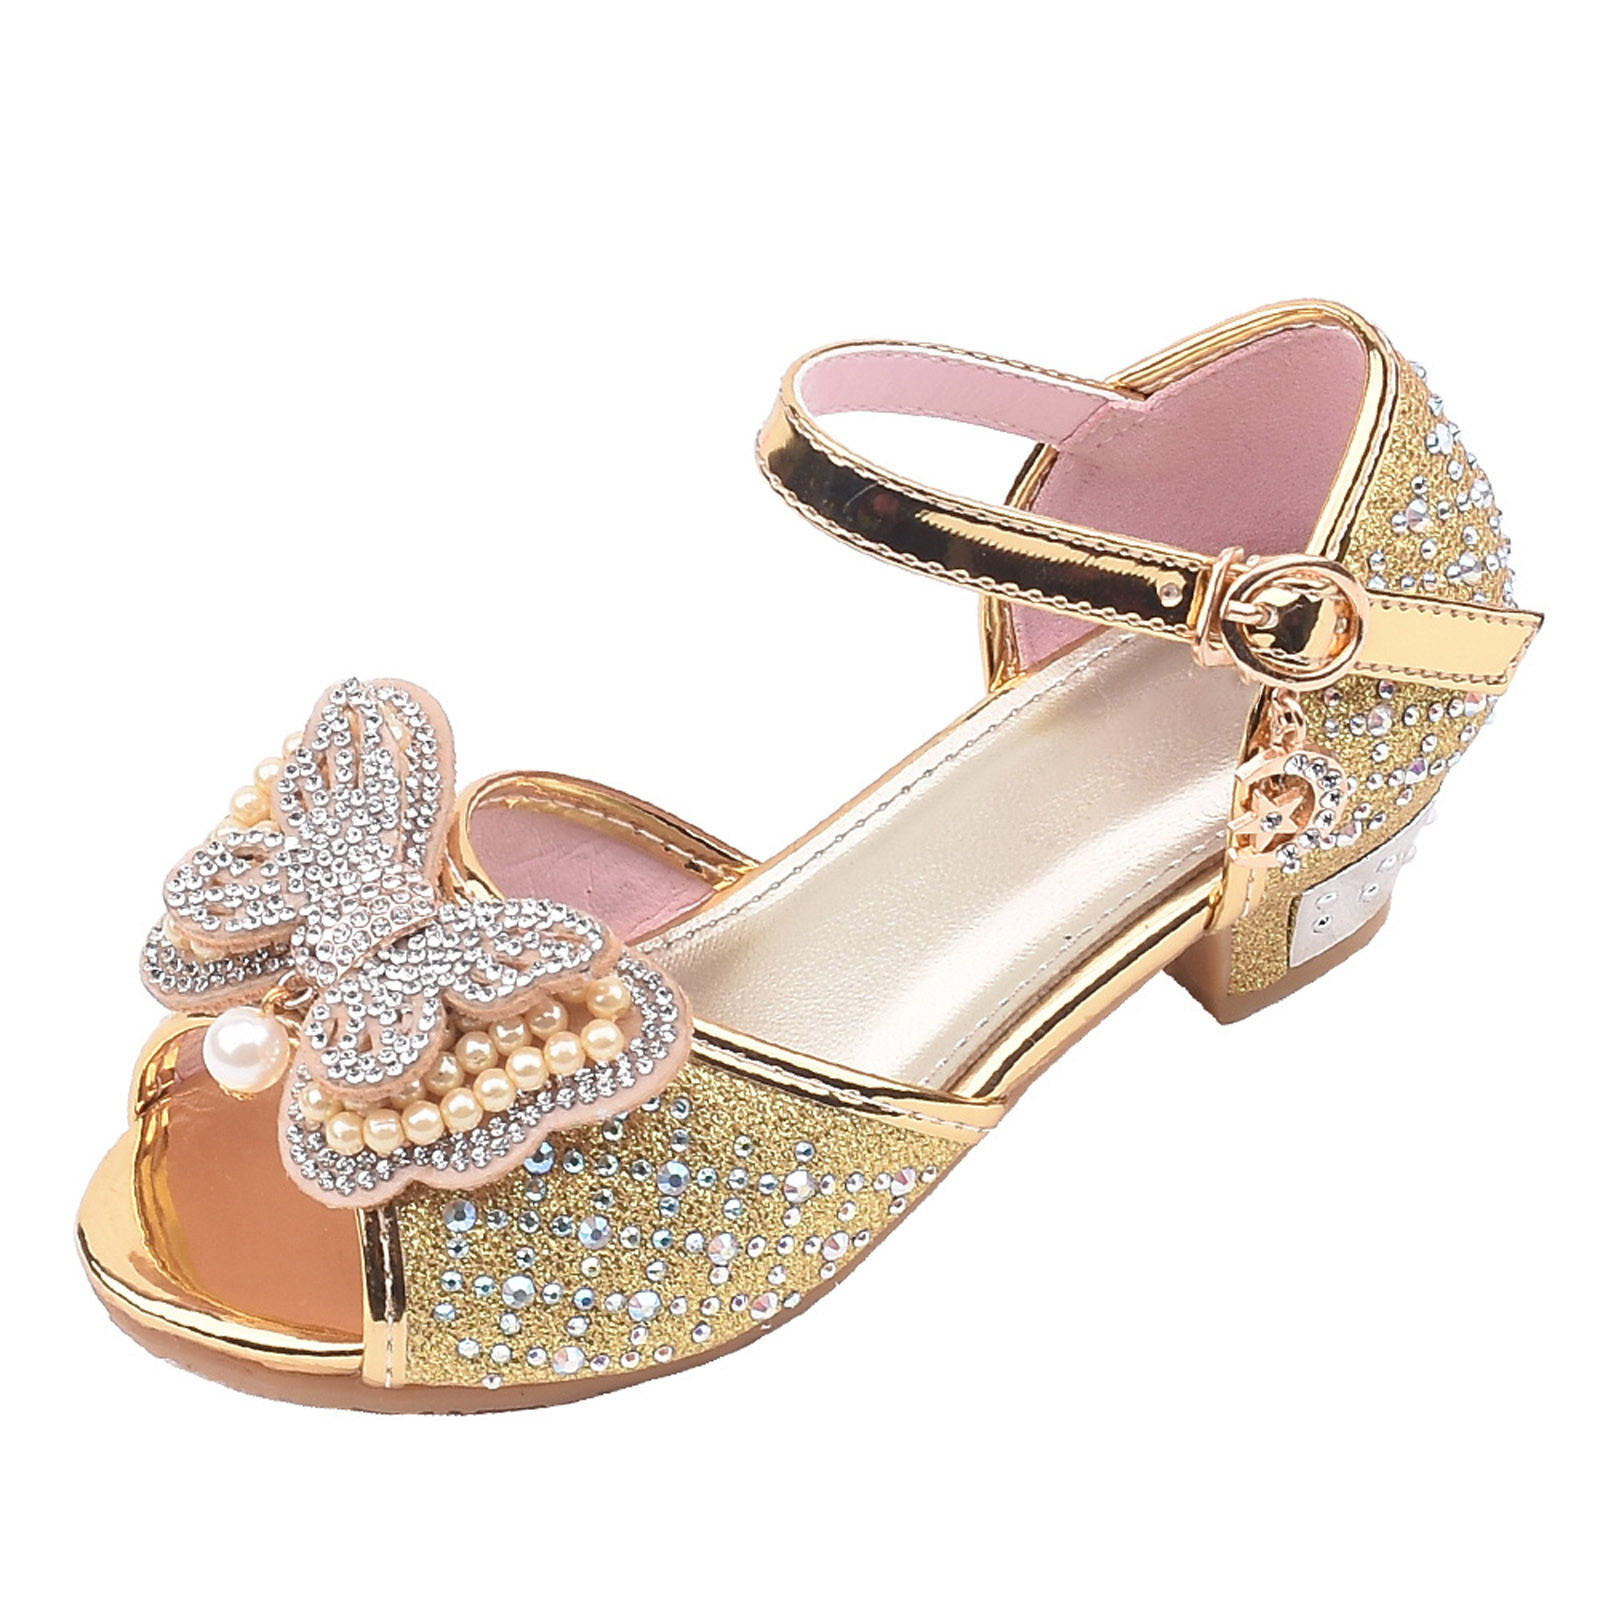 Penkiiy Children's Shoes Girls Fish Mouth Butterfly Pearl Rhinestone Crystal Princess Shoes Dance Shoes Toddler Sandals Wonder 5.5-6 Years Gold On Clearance - image 1 of 7